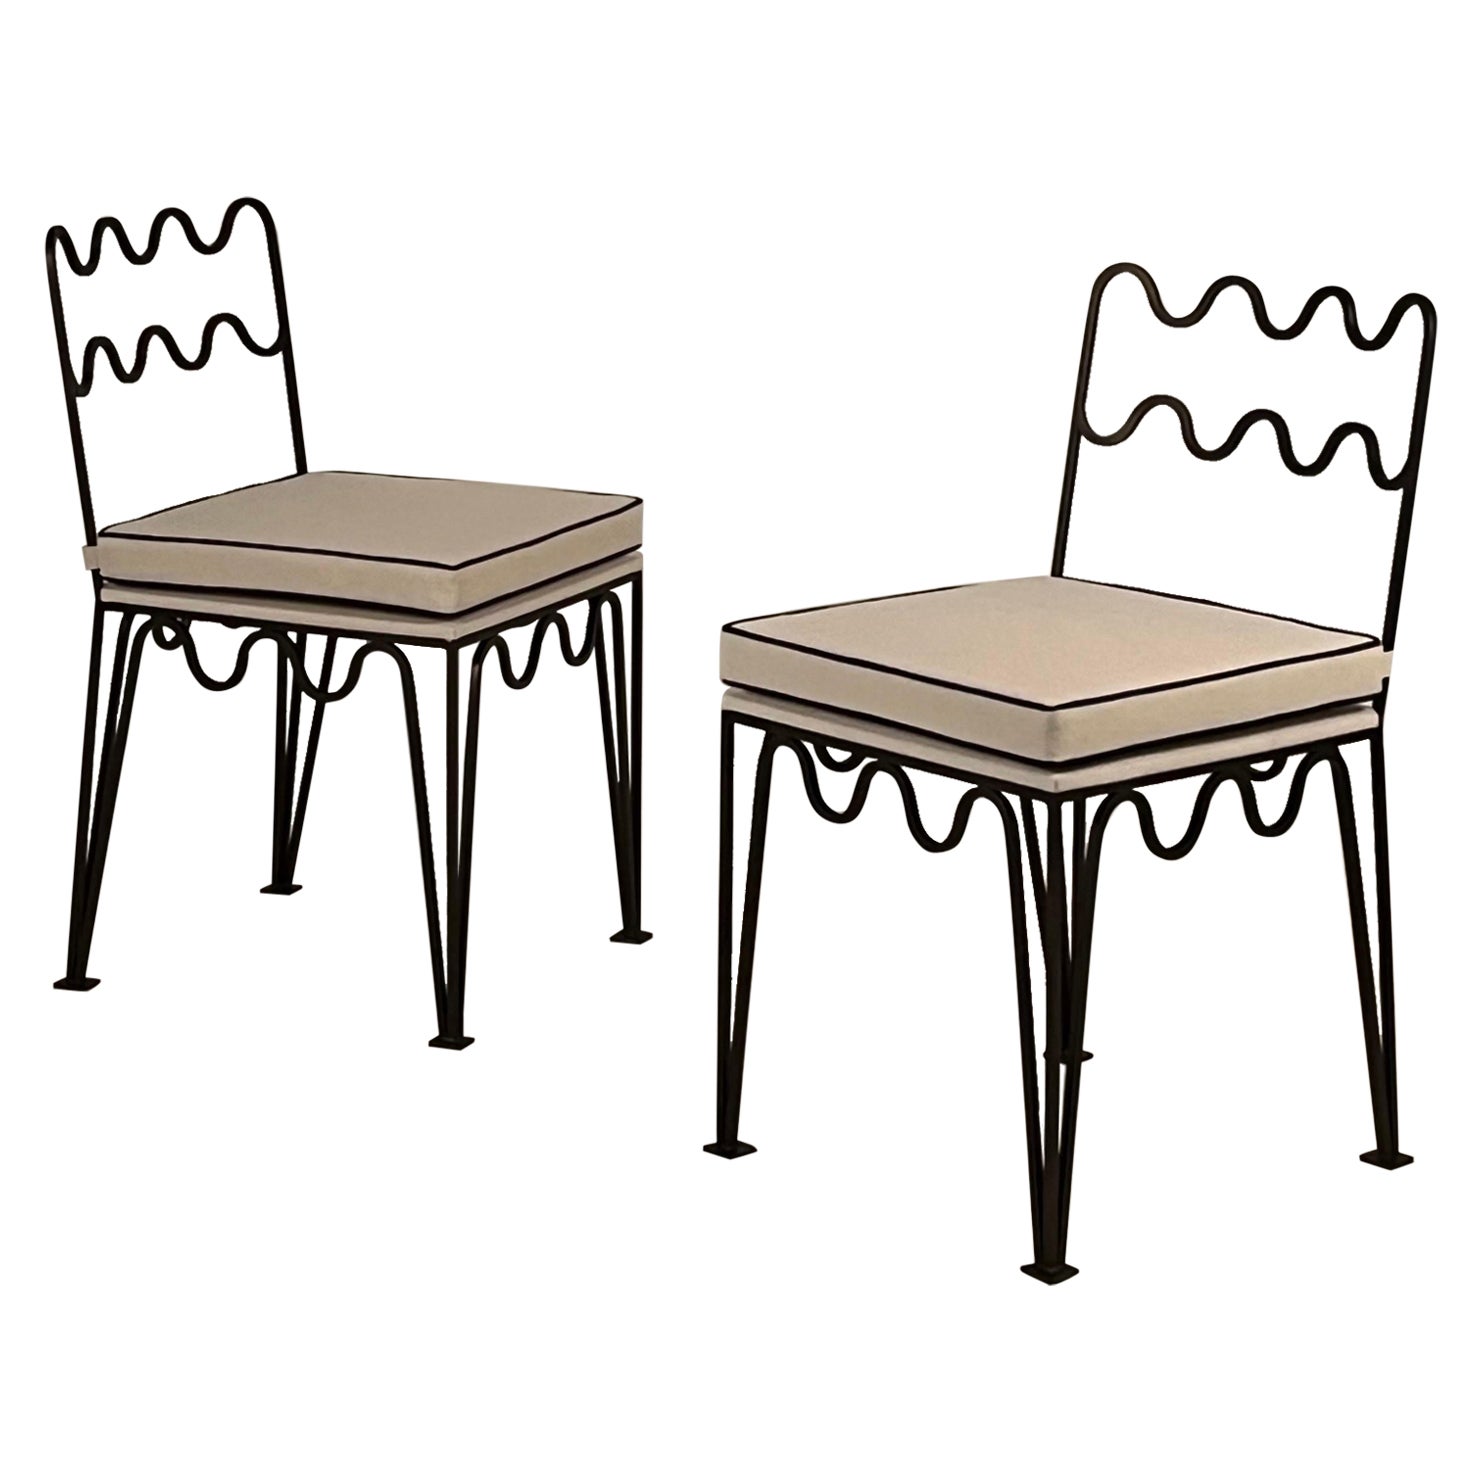 Pair of Undulating Méandre Chairs by Design Frères For Sale